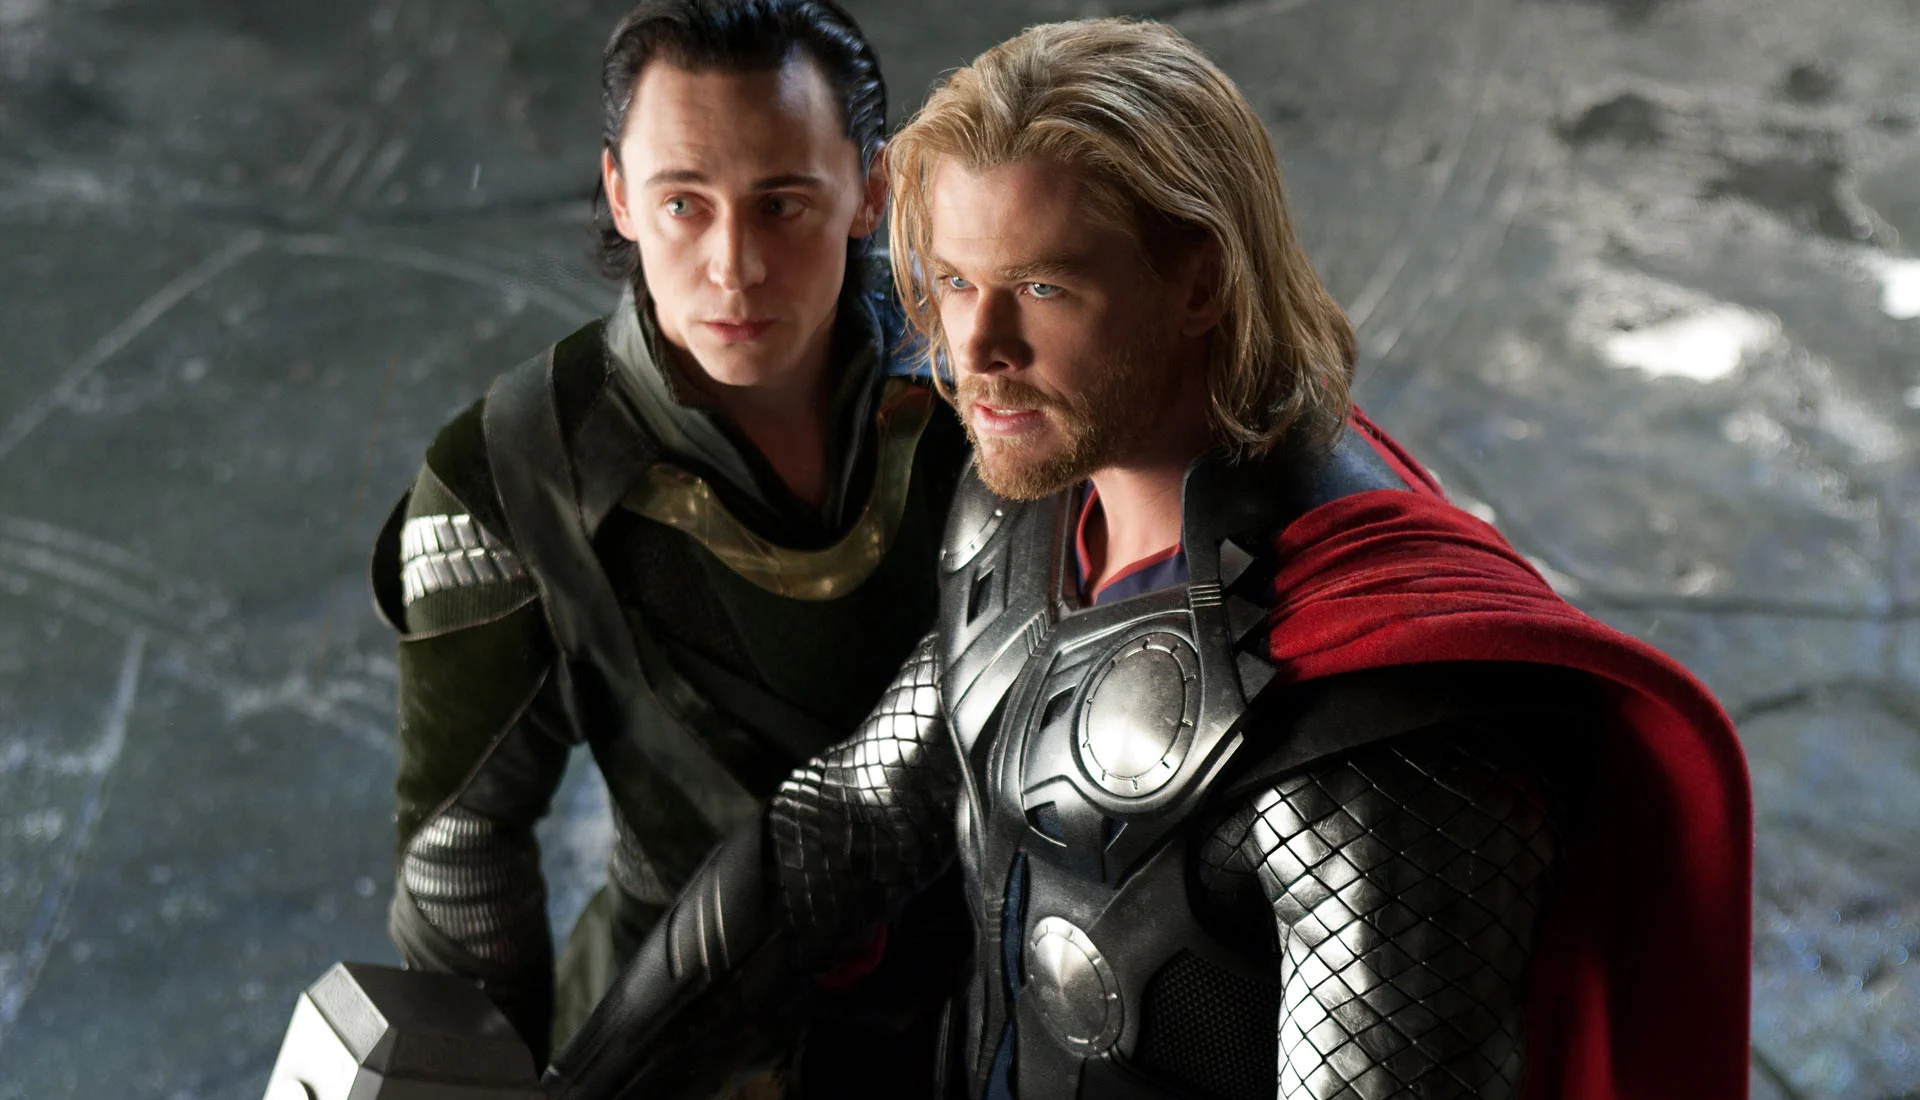 Chris And Tom in movie Thor